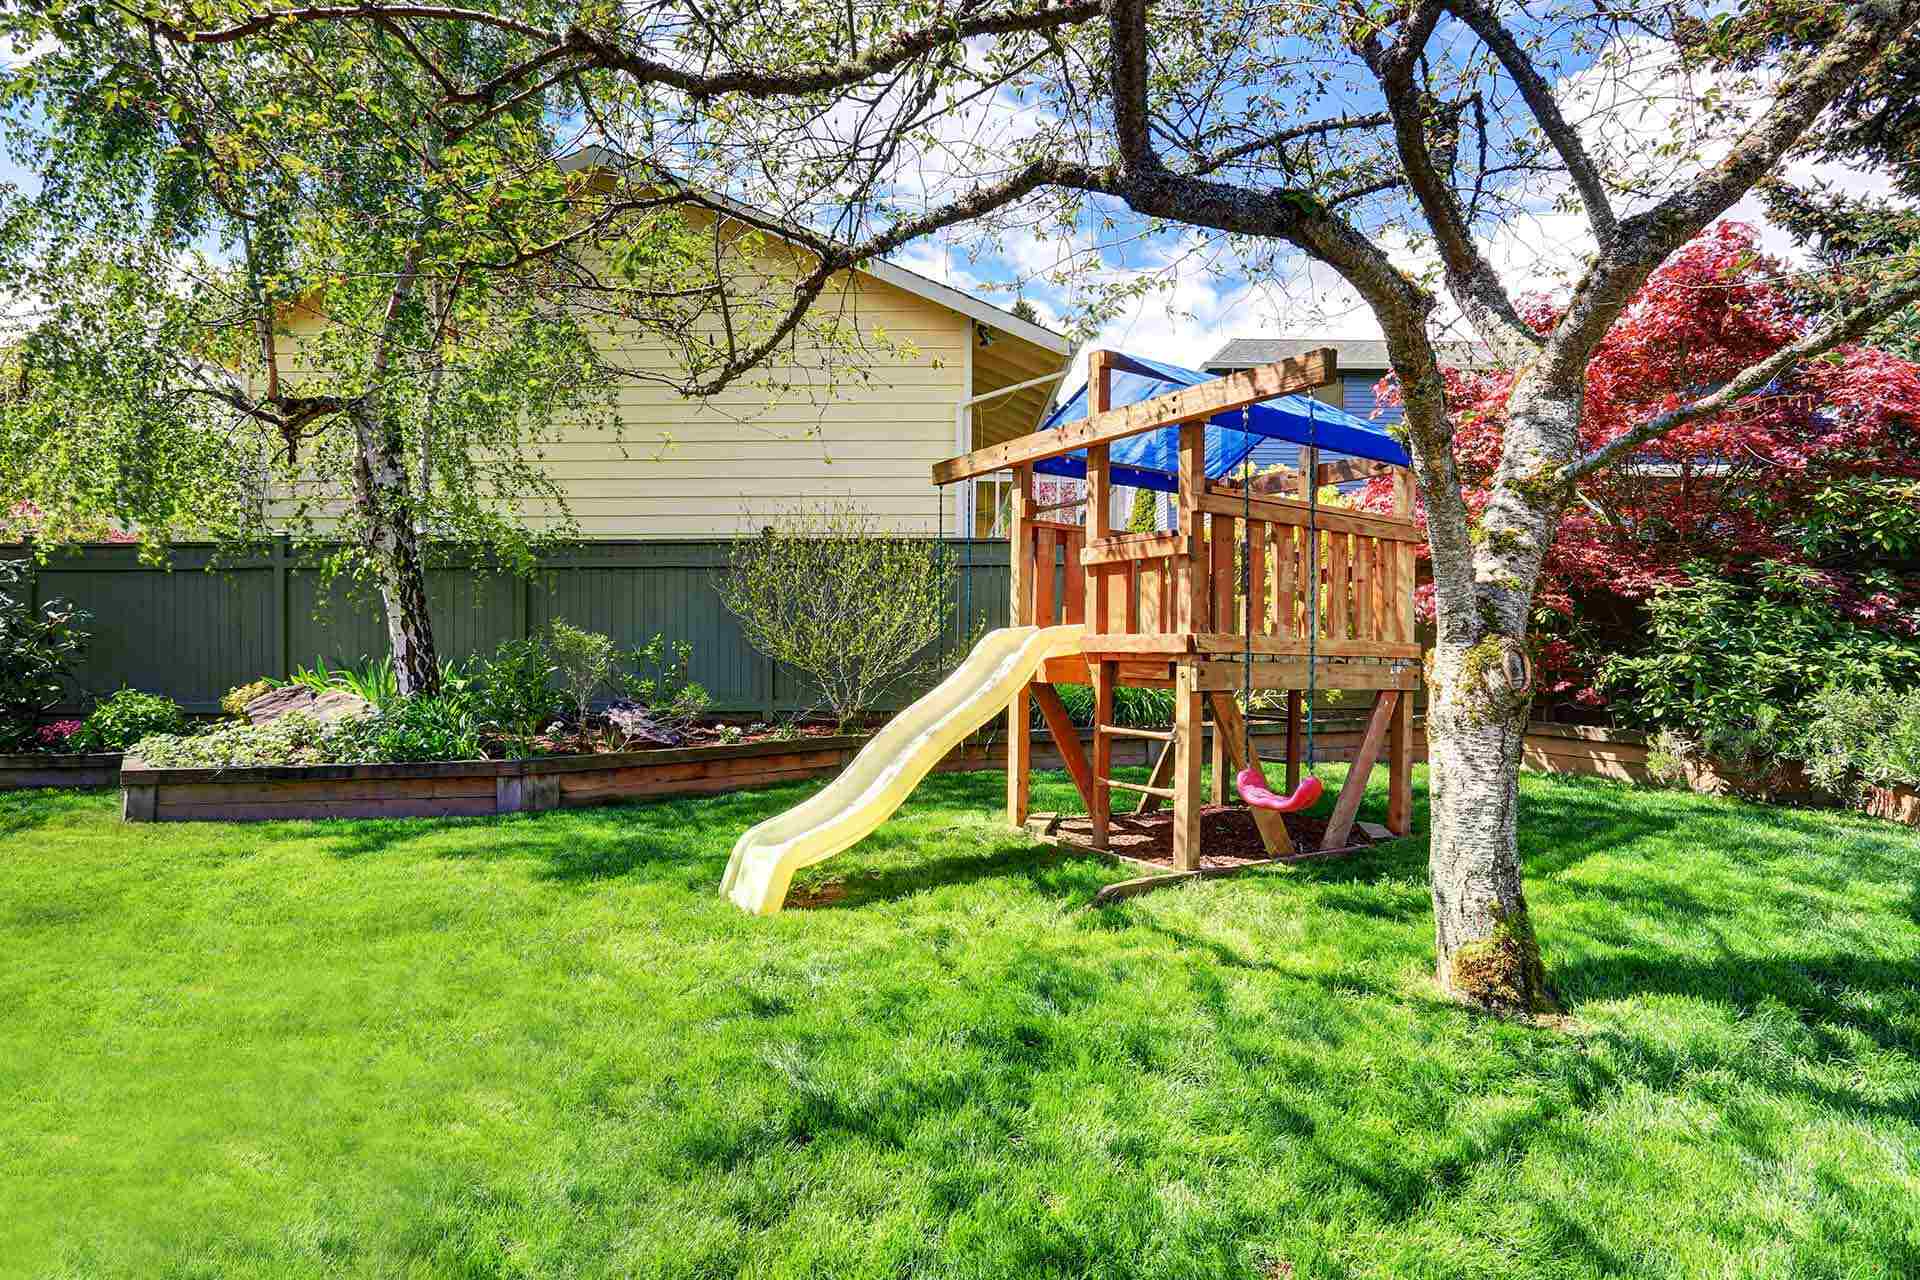 What Is A Good Ground Cover For A Backyard Playground